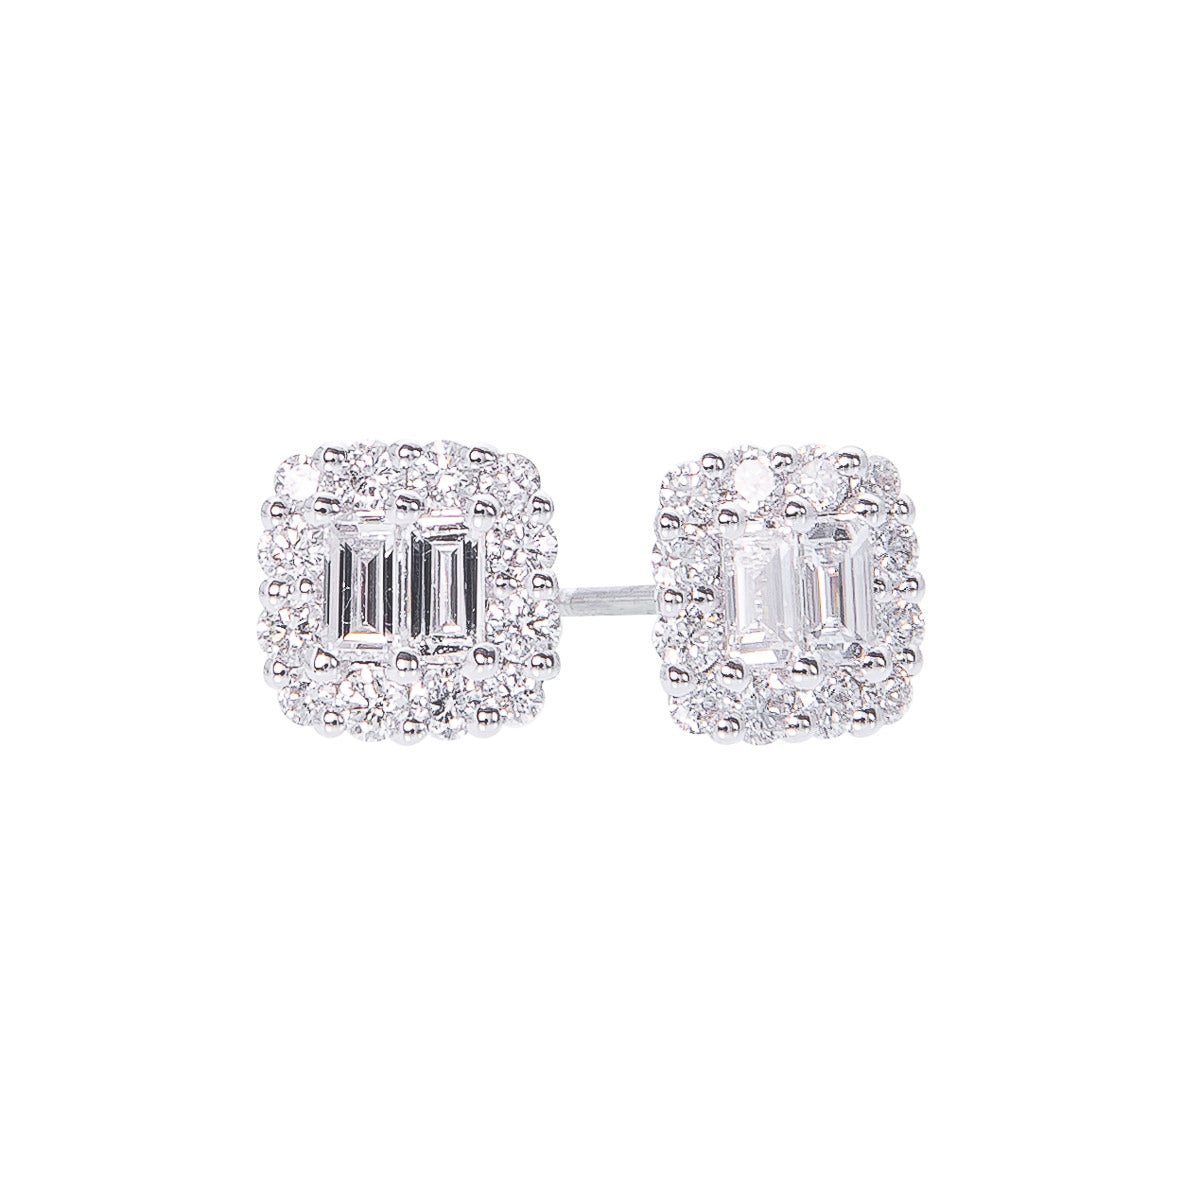 Sabel Collection 14K White Gold Baguette and Round Diamond Stud Earrings